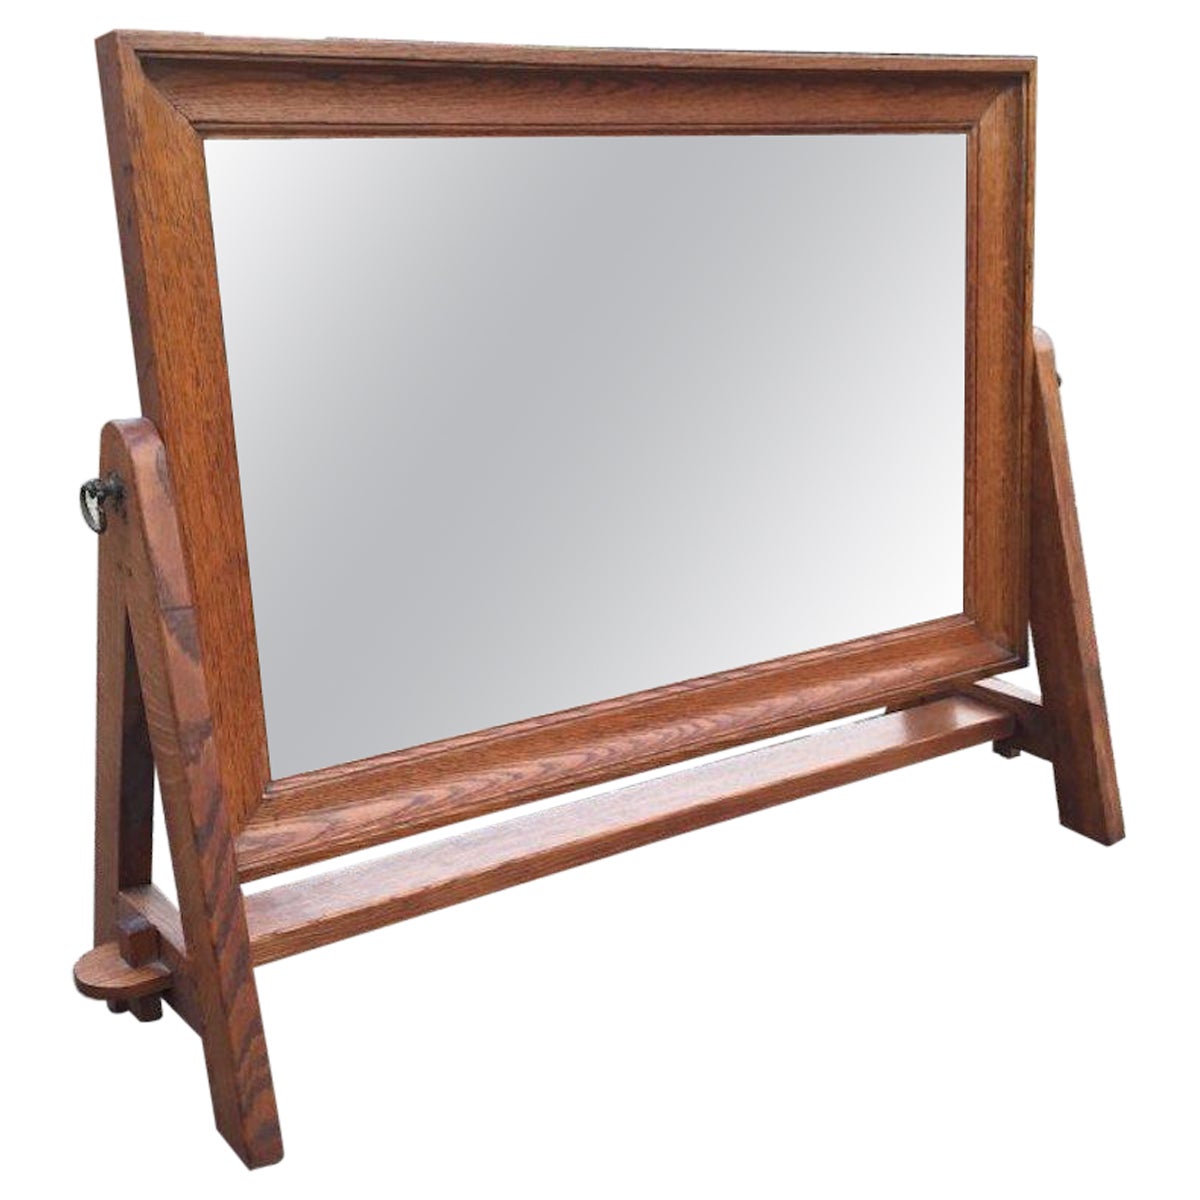 Arts & Crafts Cotswold School Dressing Table Swivel Mirror with a Frame Sides